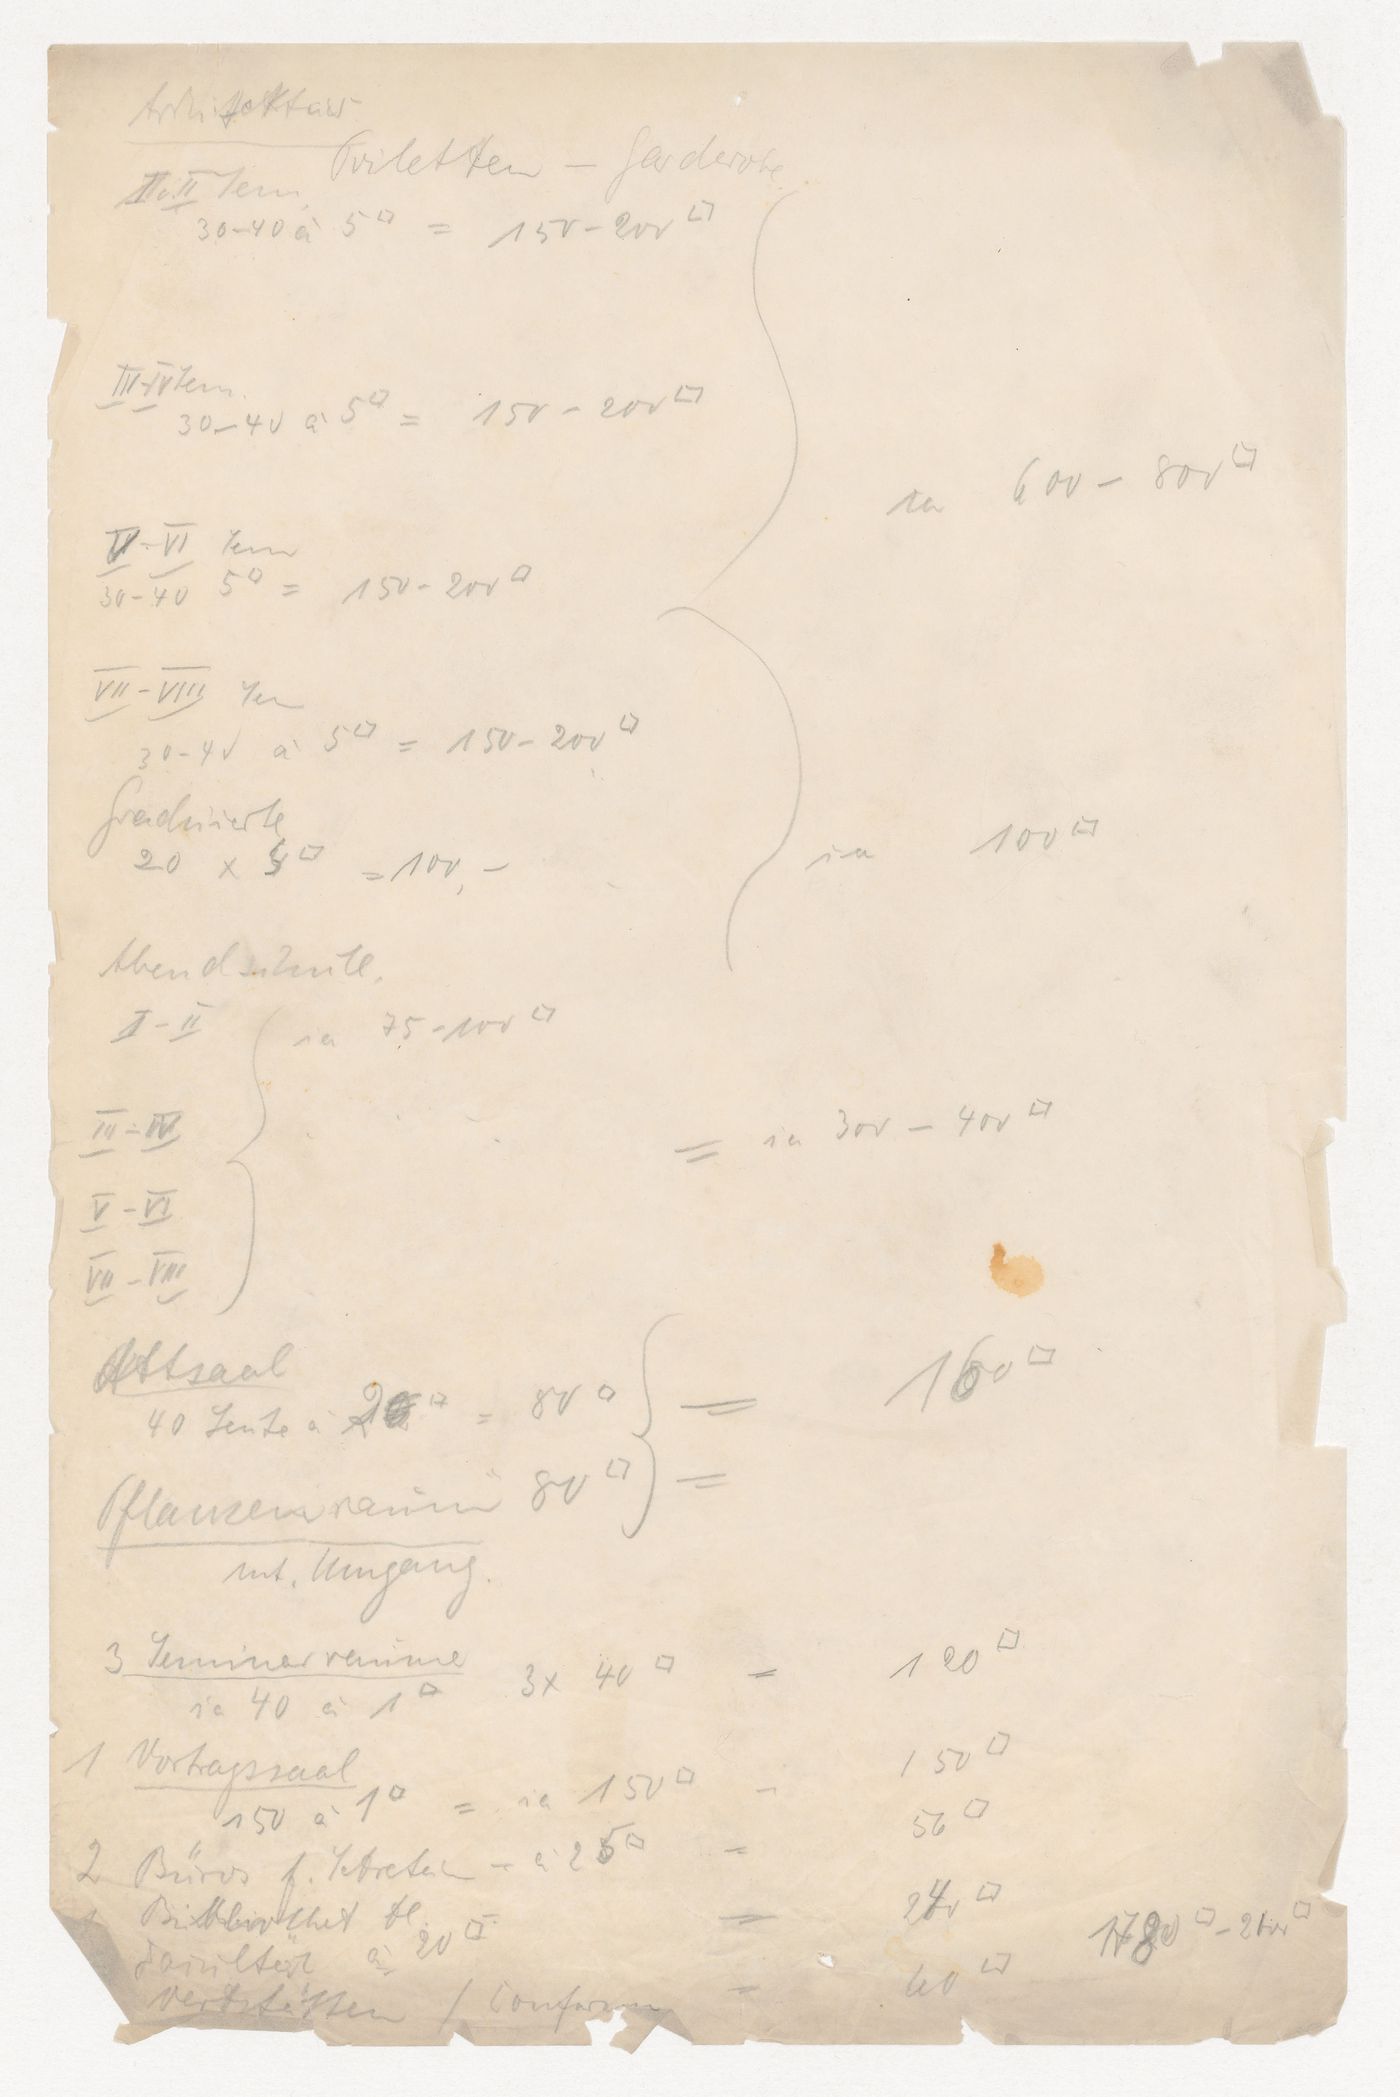 Notes and calculations for Illinois Institute of Technology, probably for space requirements